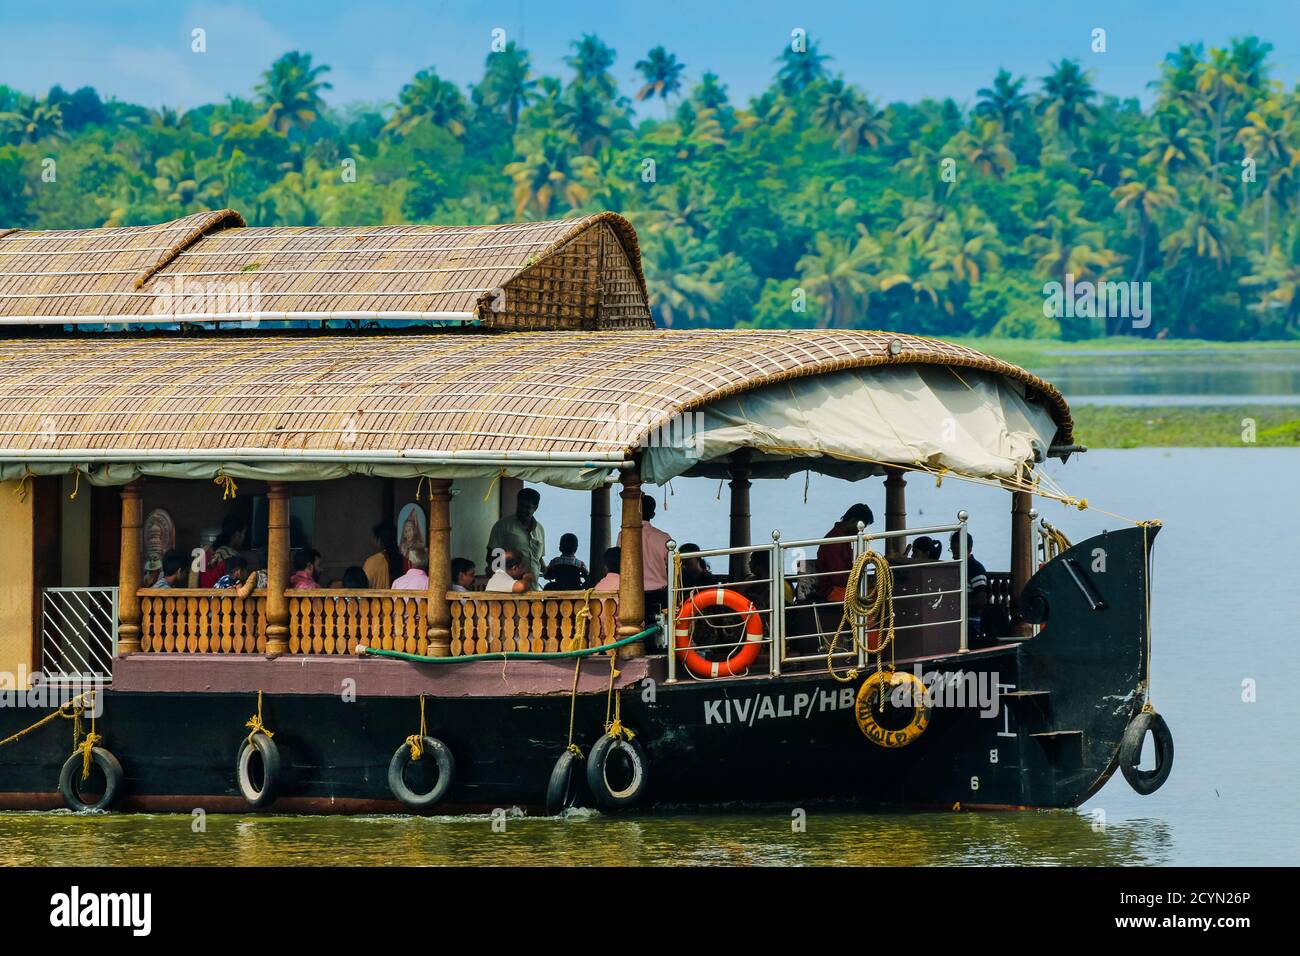 Typical Kerala houseboat on Lake Vembanad during one of the very popular backwater cruises here; Alappuzha (Alleppey), Kerala, India Stock Photo